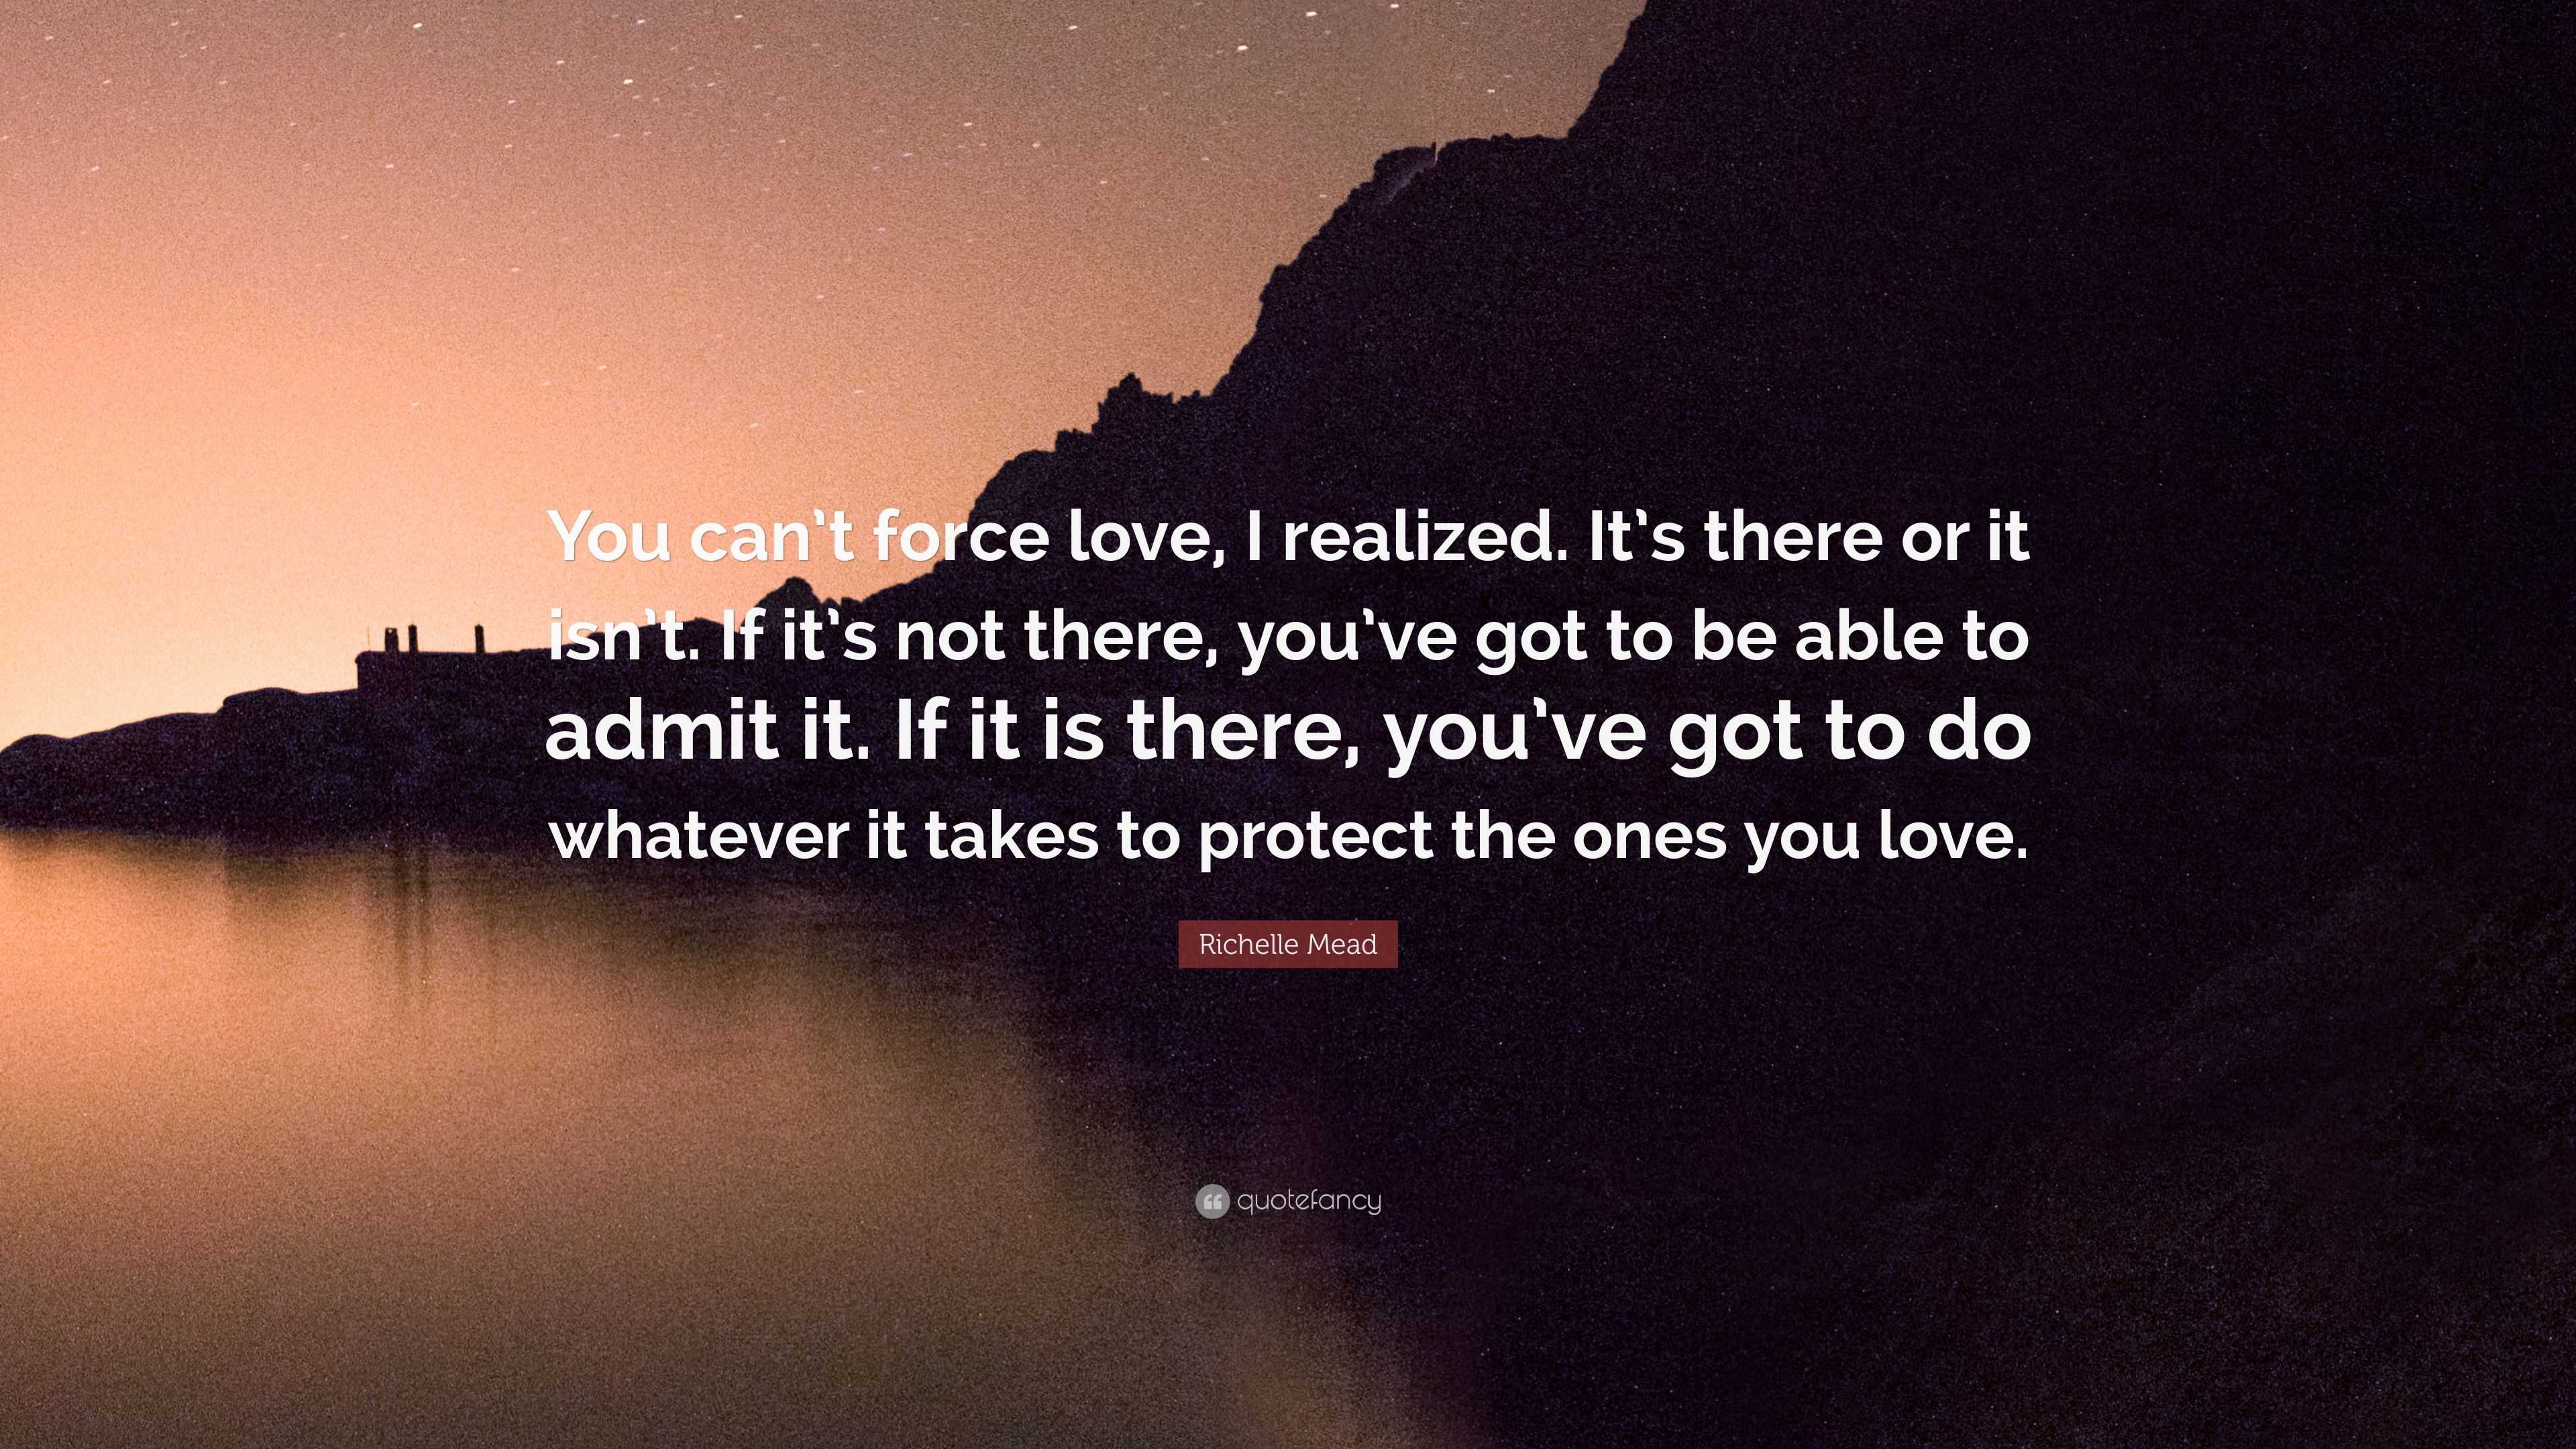 Richelle Mead Quote “You can t force love I realized It s